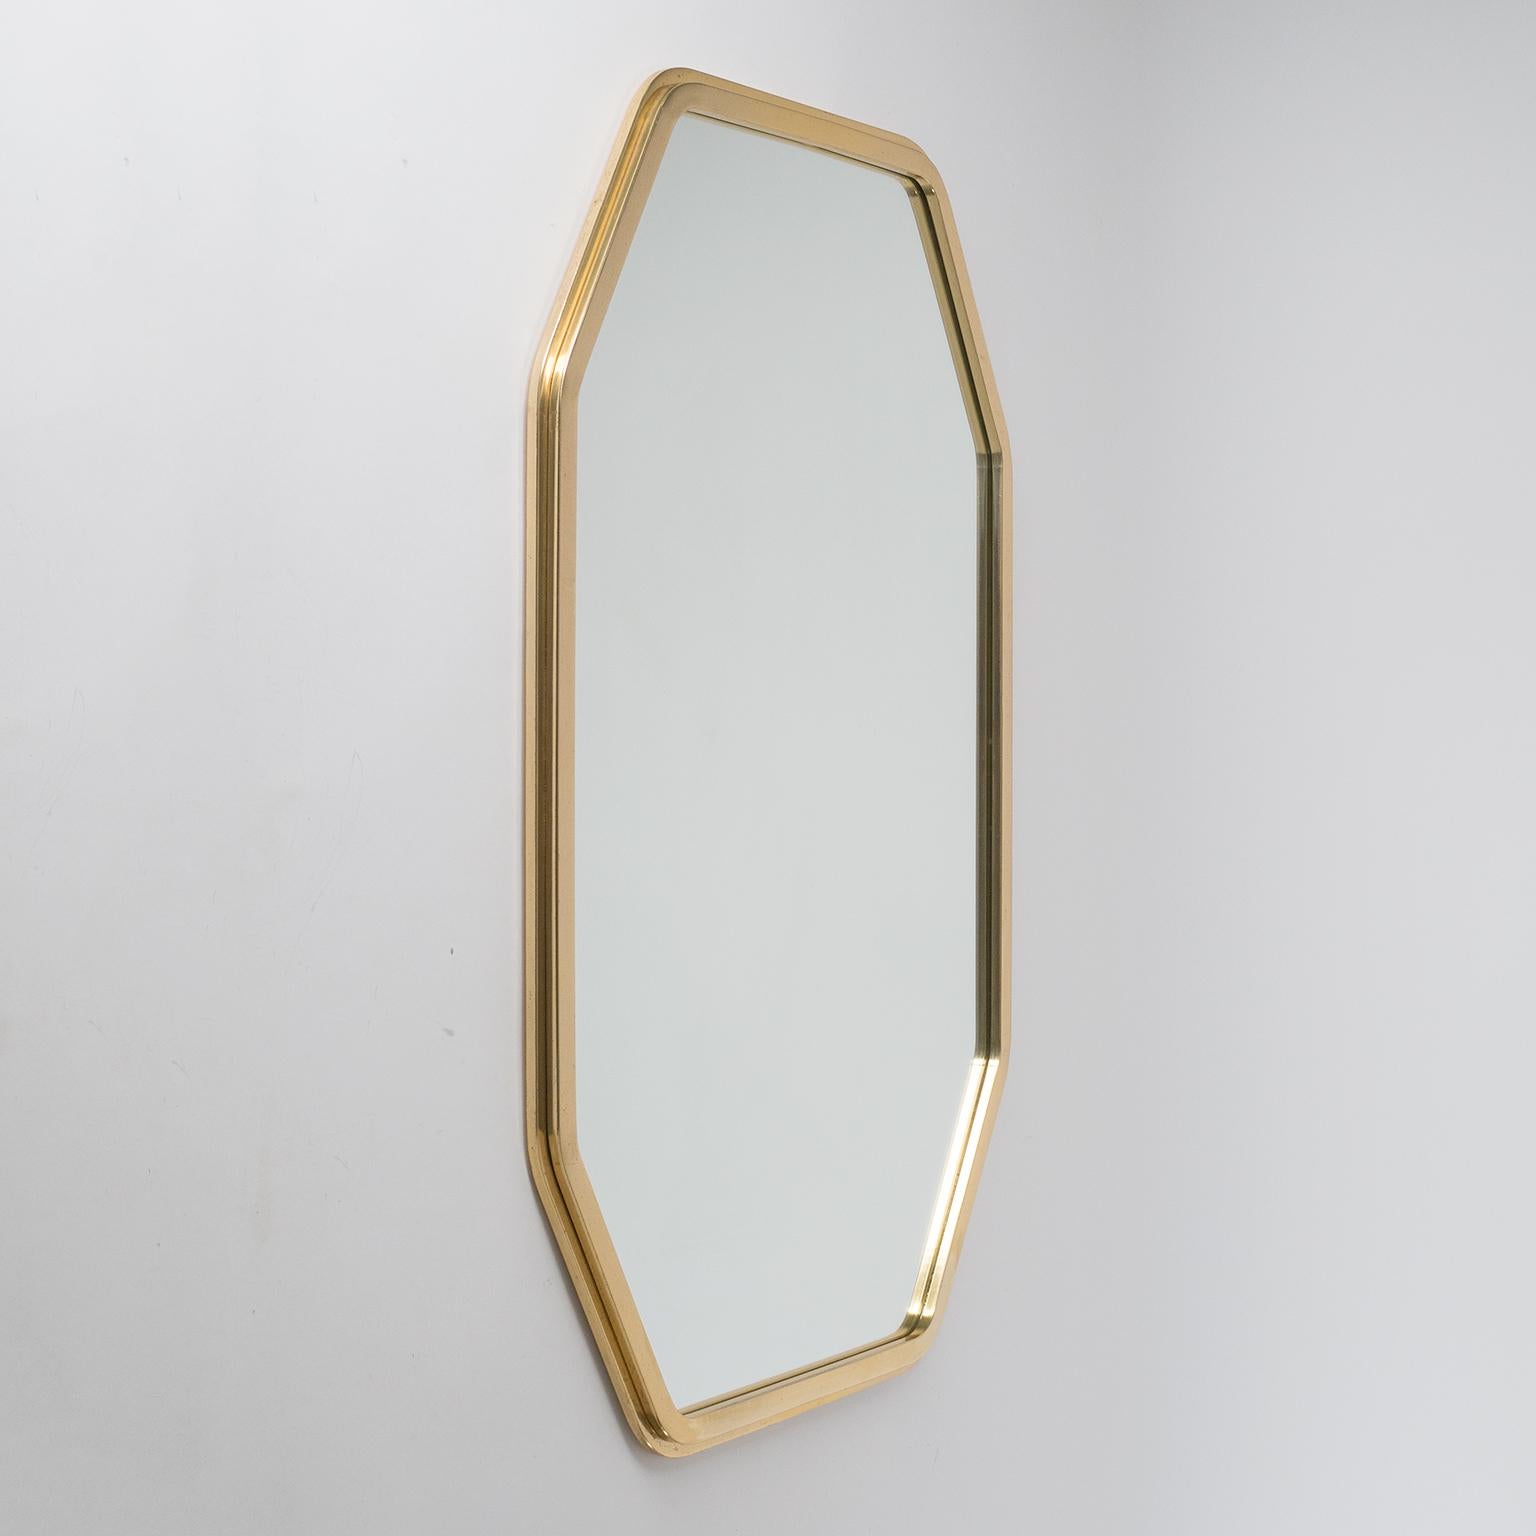 Fine Italian wall mirror from the 1970s. Continuous octagonal frame made of gilt steel with minor patina. Can be mounted vertically or horizontally.